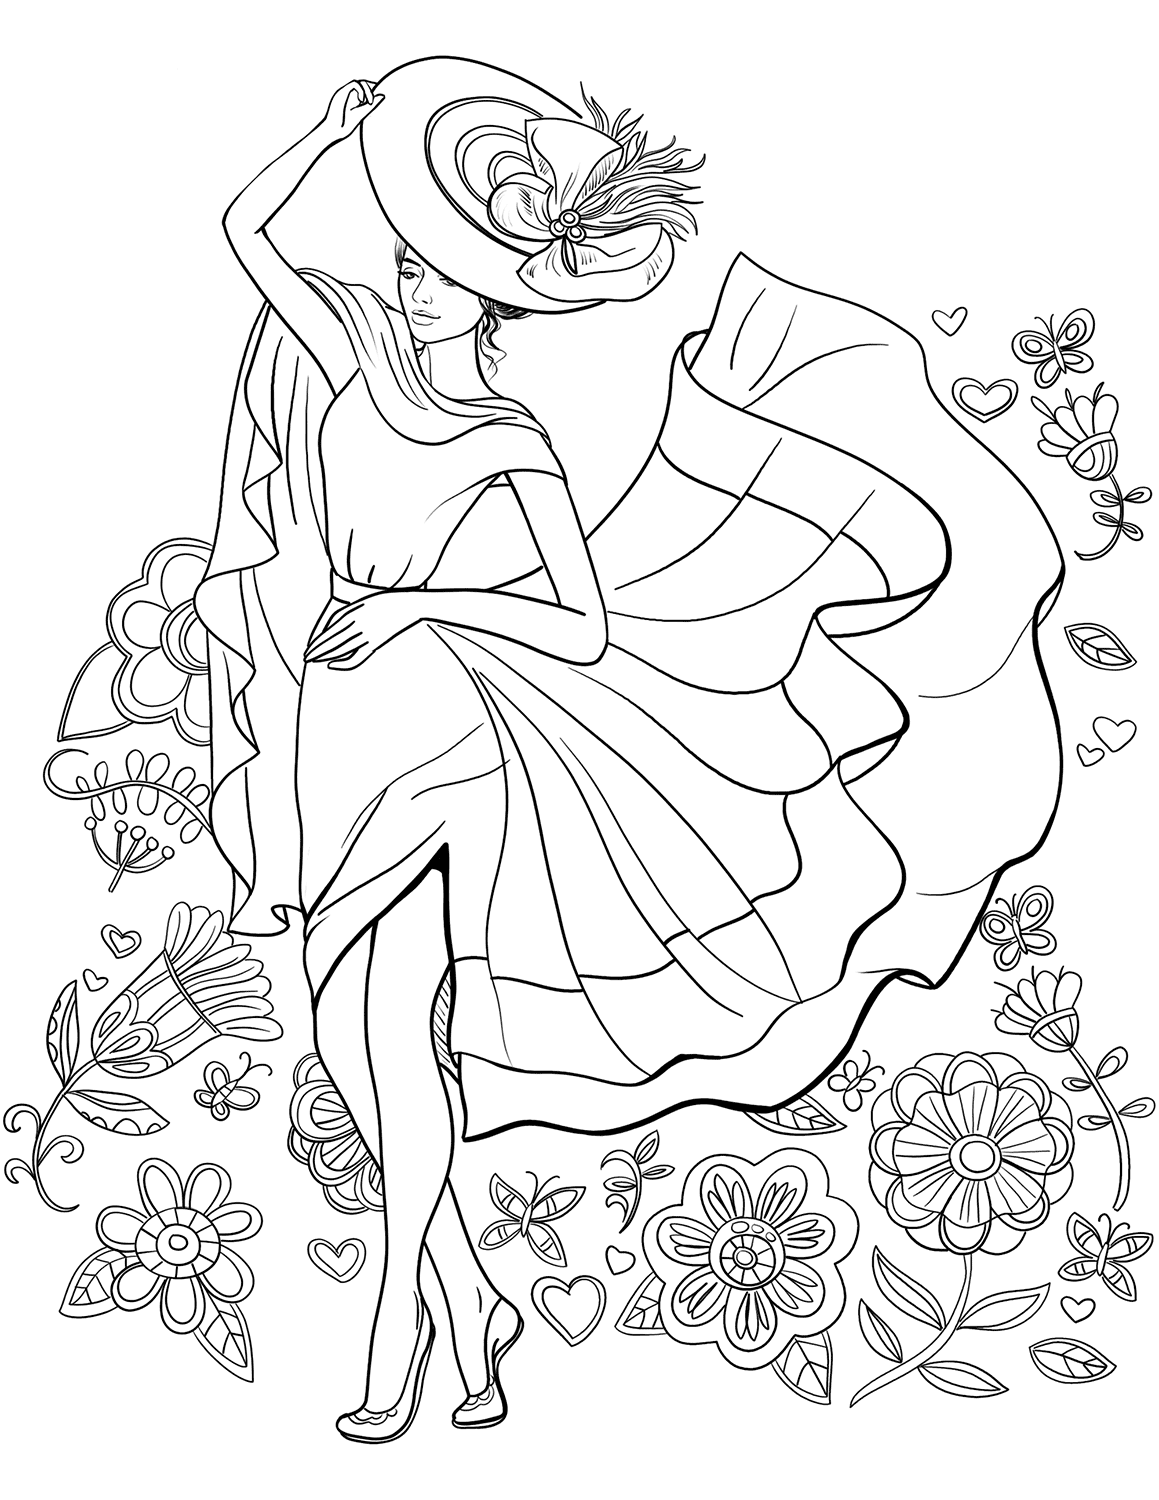 Beautiful Teenager Girl With Flowers Coloring Page